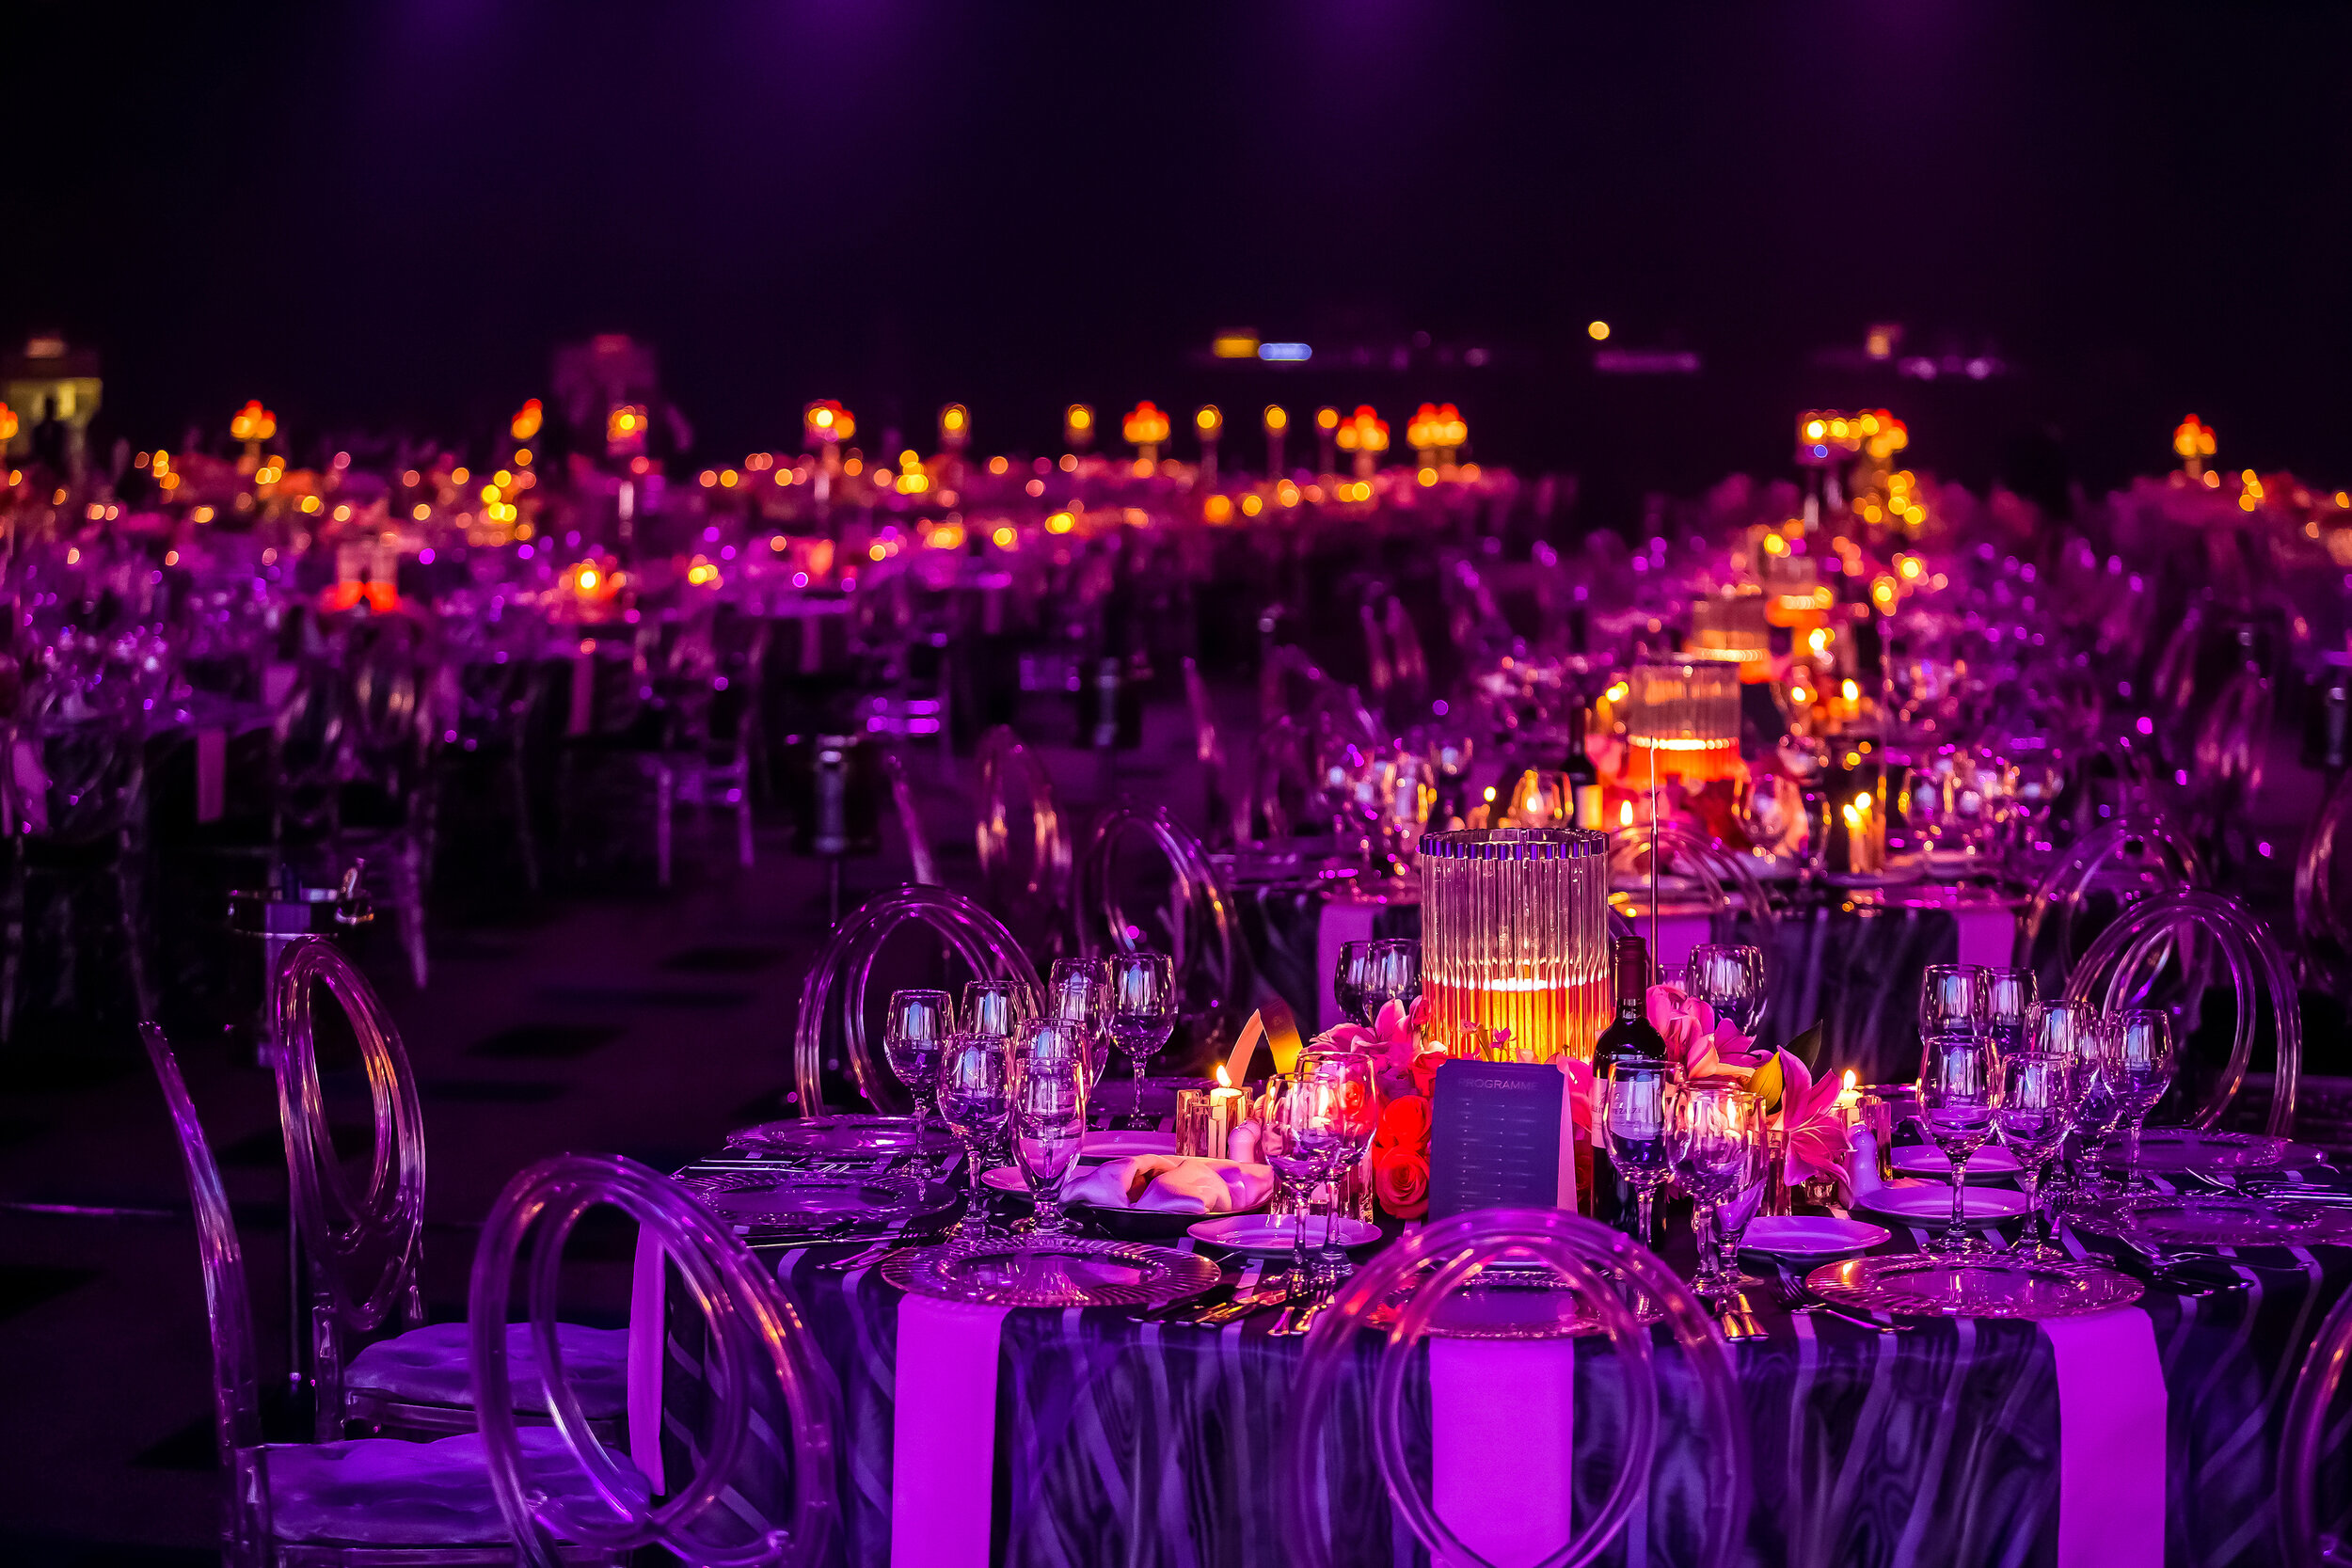 Purple Decor Setting For A Gala Dinner Or Event